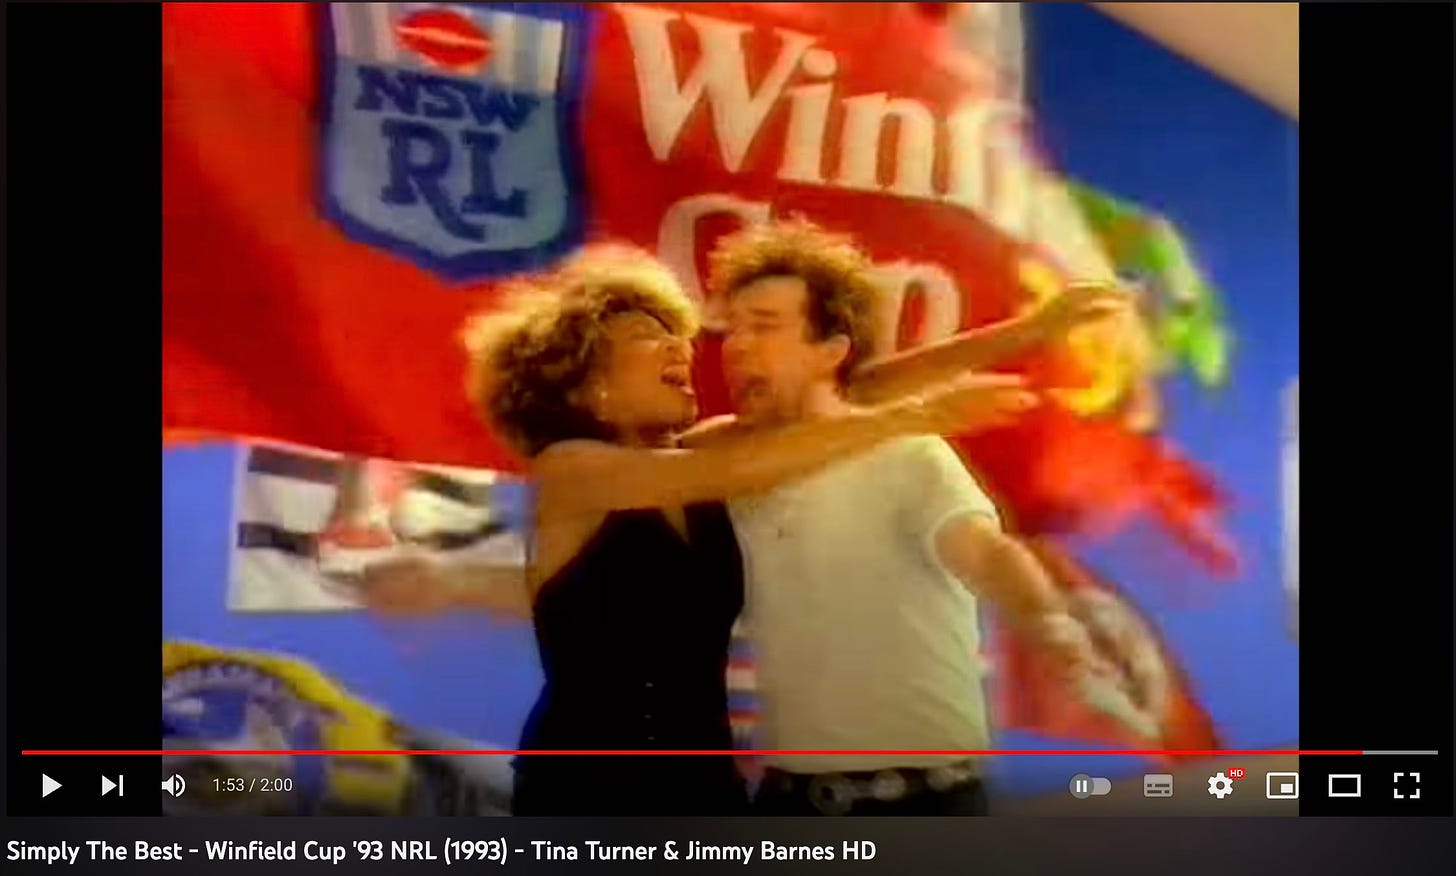 Tina Turner and Jimmy Barnes in the best ever NRL song clip - Simply The Best